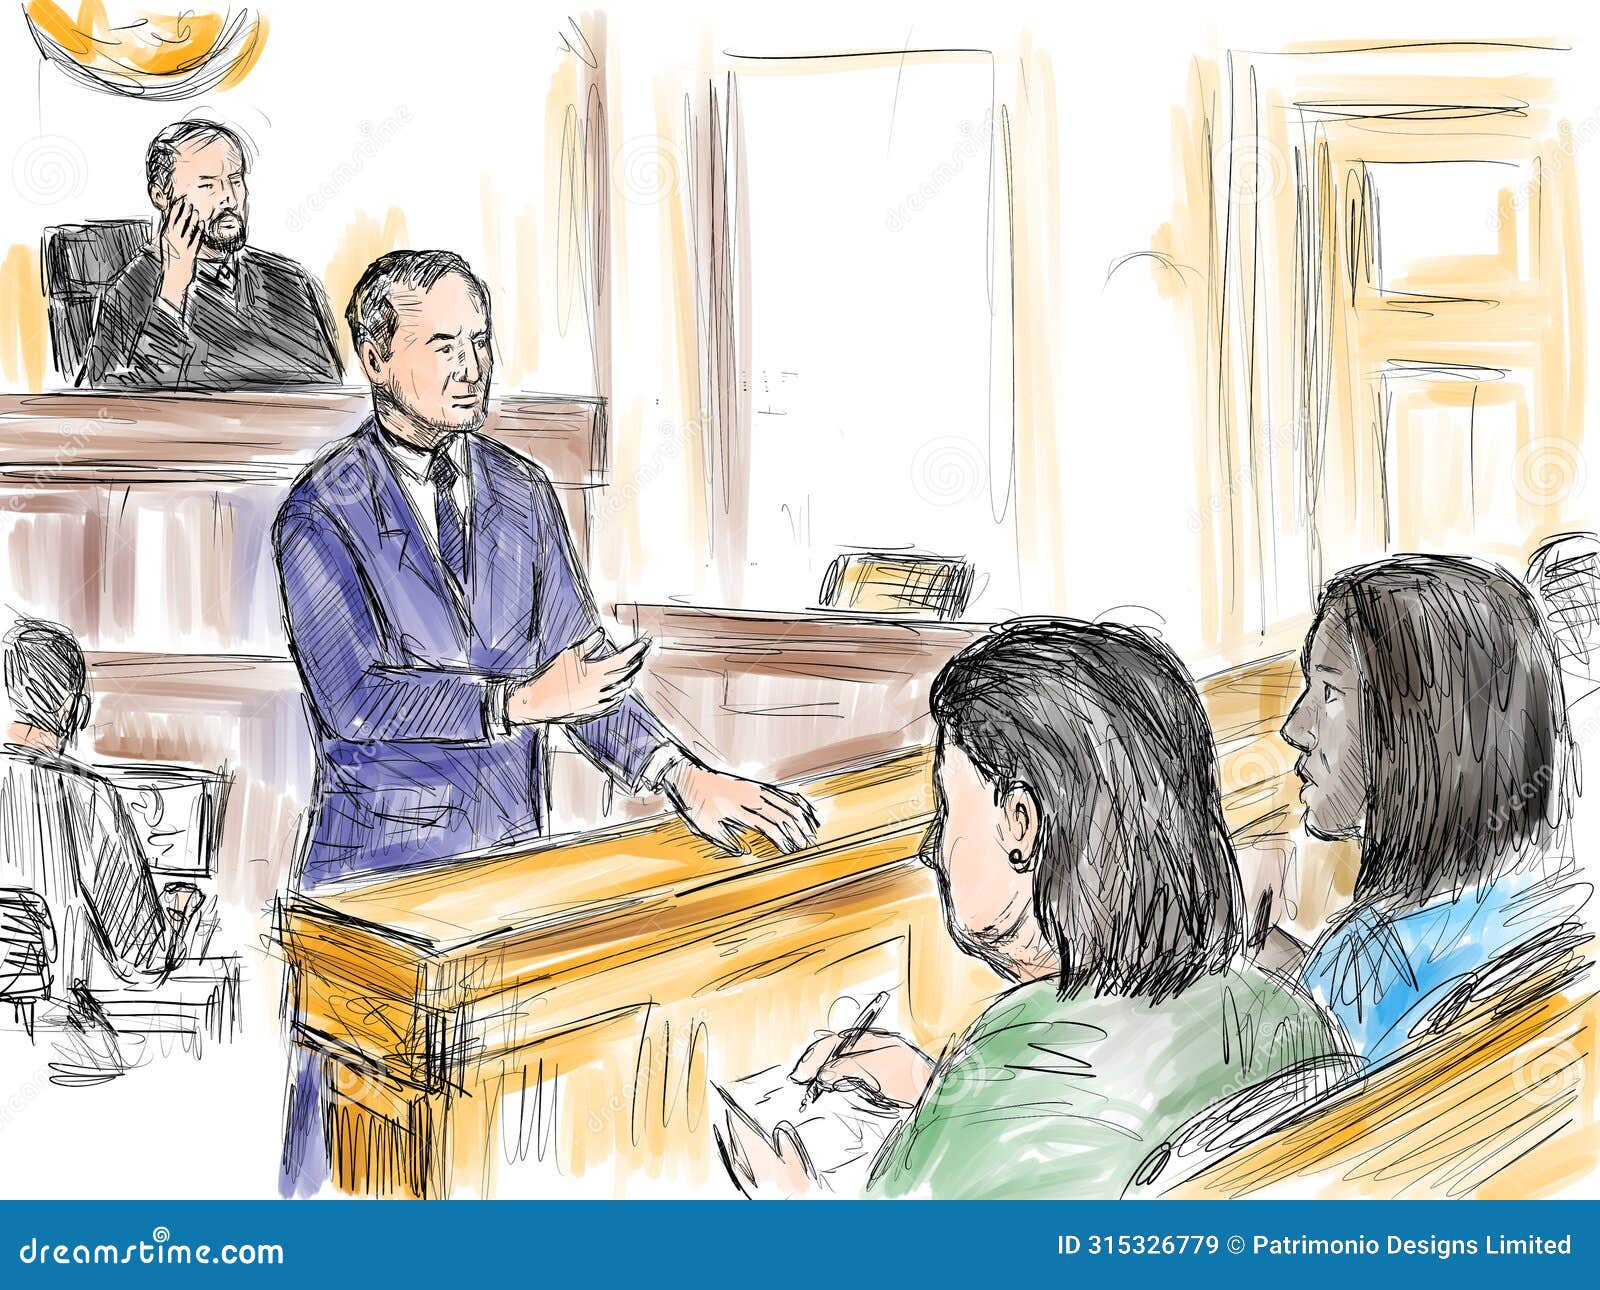 courtroom trial sketch showing lawyer of defendant or plaintiff addressing jury inside court of law